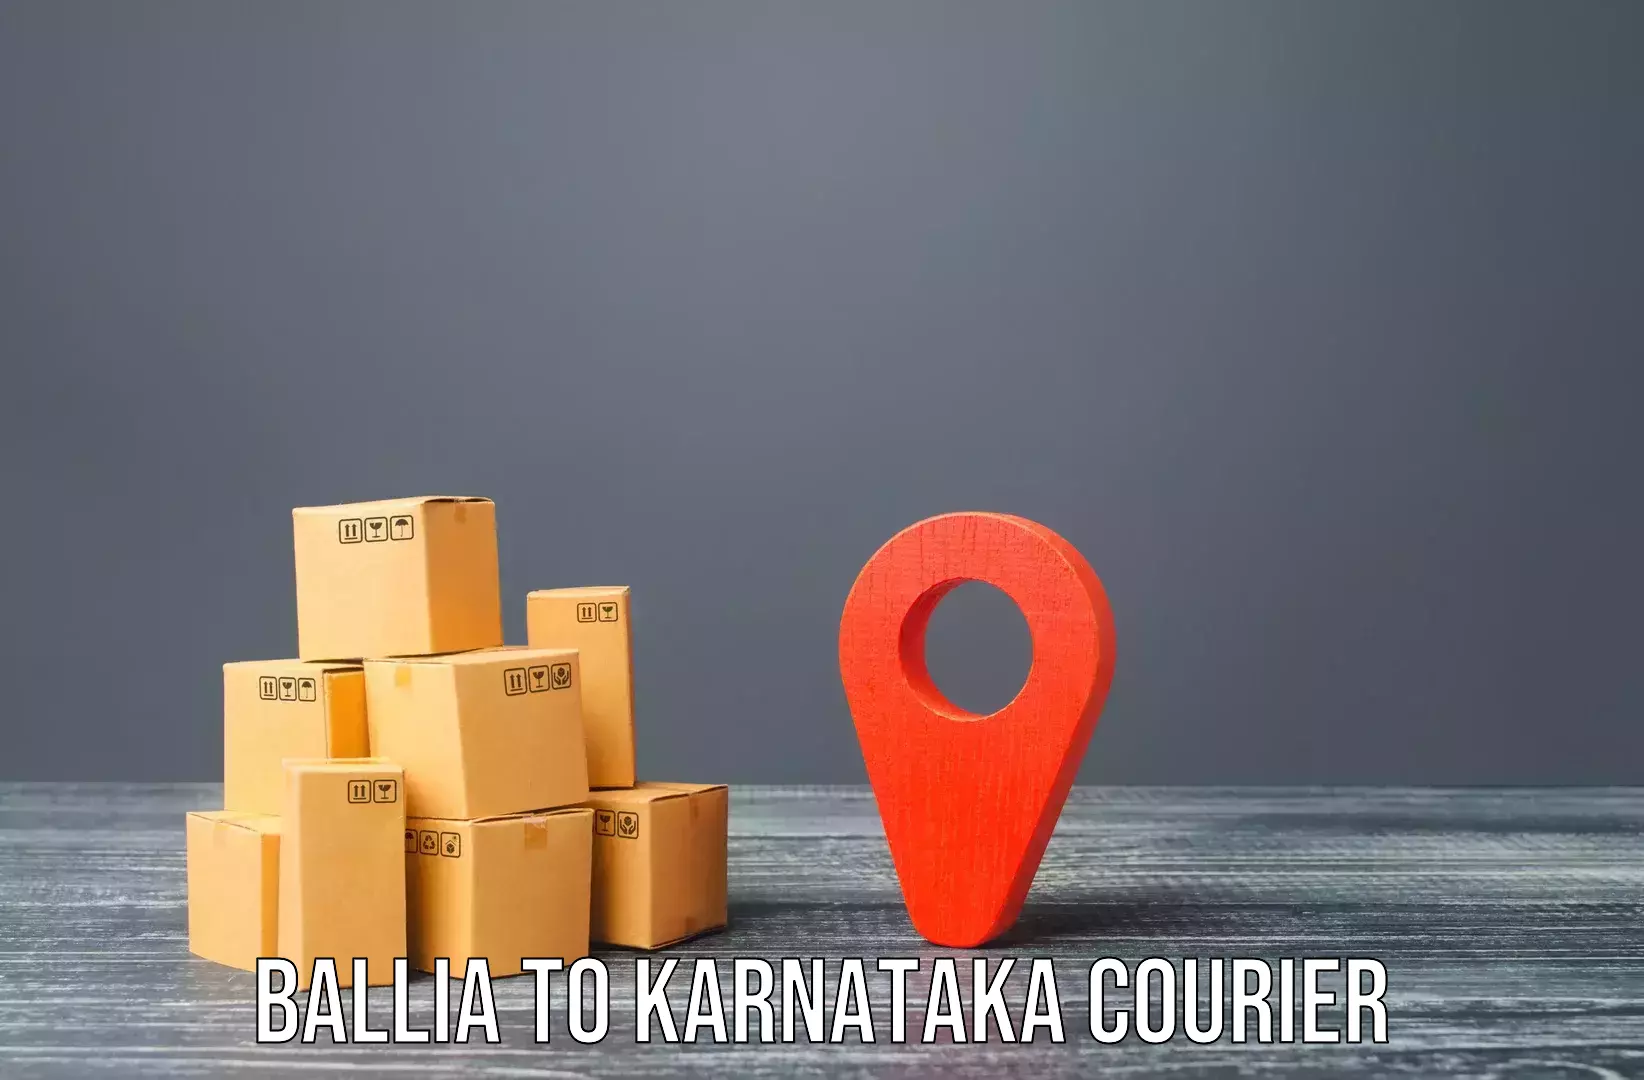 Home relocation experts Ballia to Sirsi